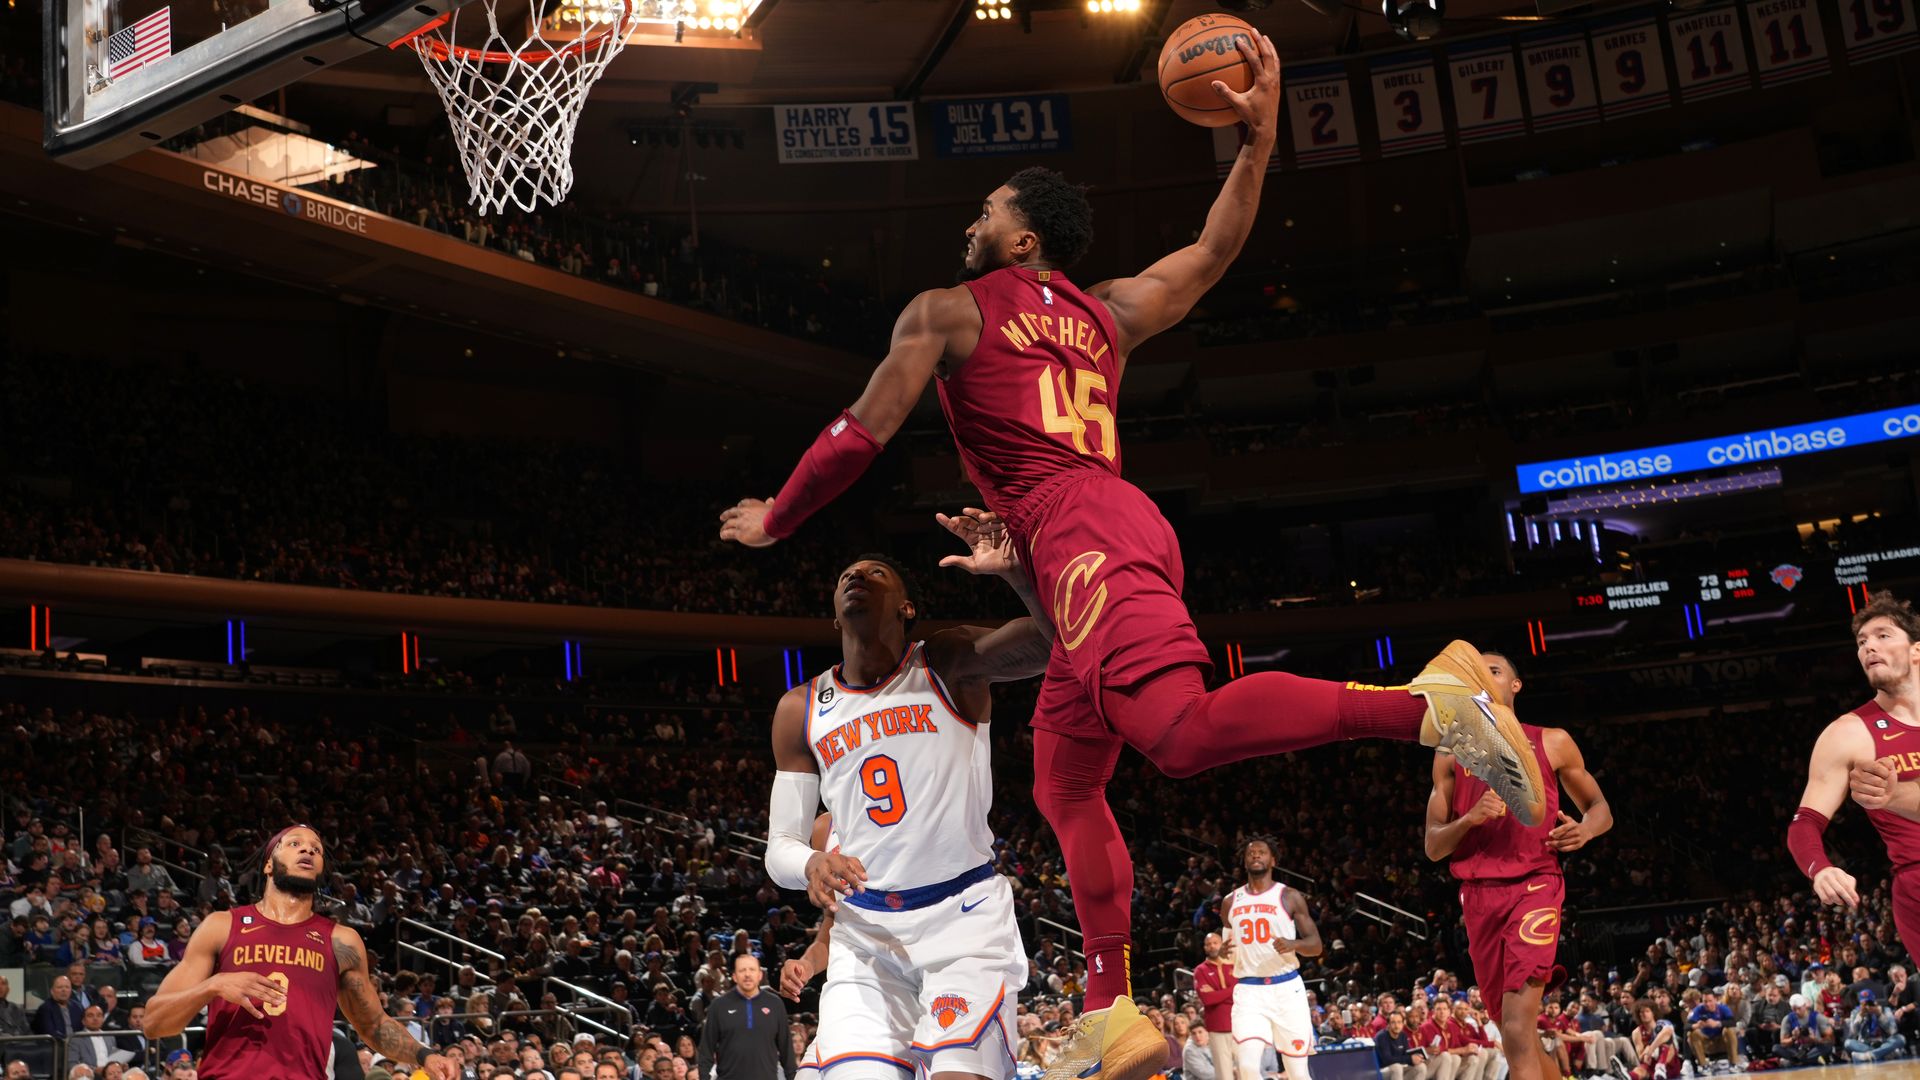 The Cavs' Donovan Mitchell, in red, dunks on the Knicks' RJ Barrett, in white. 